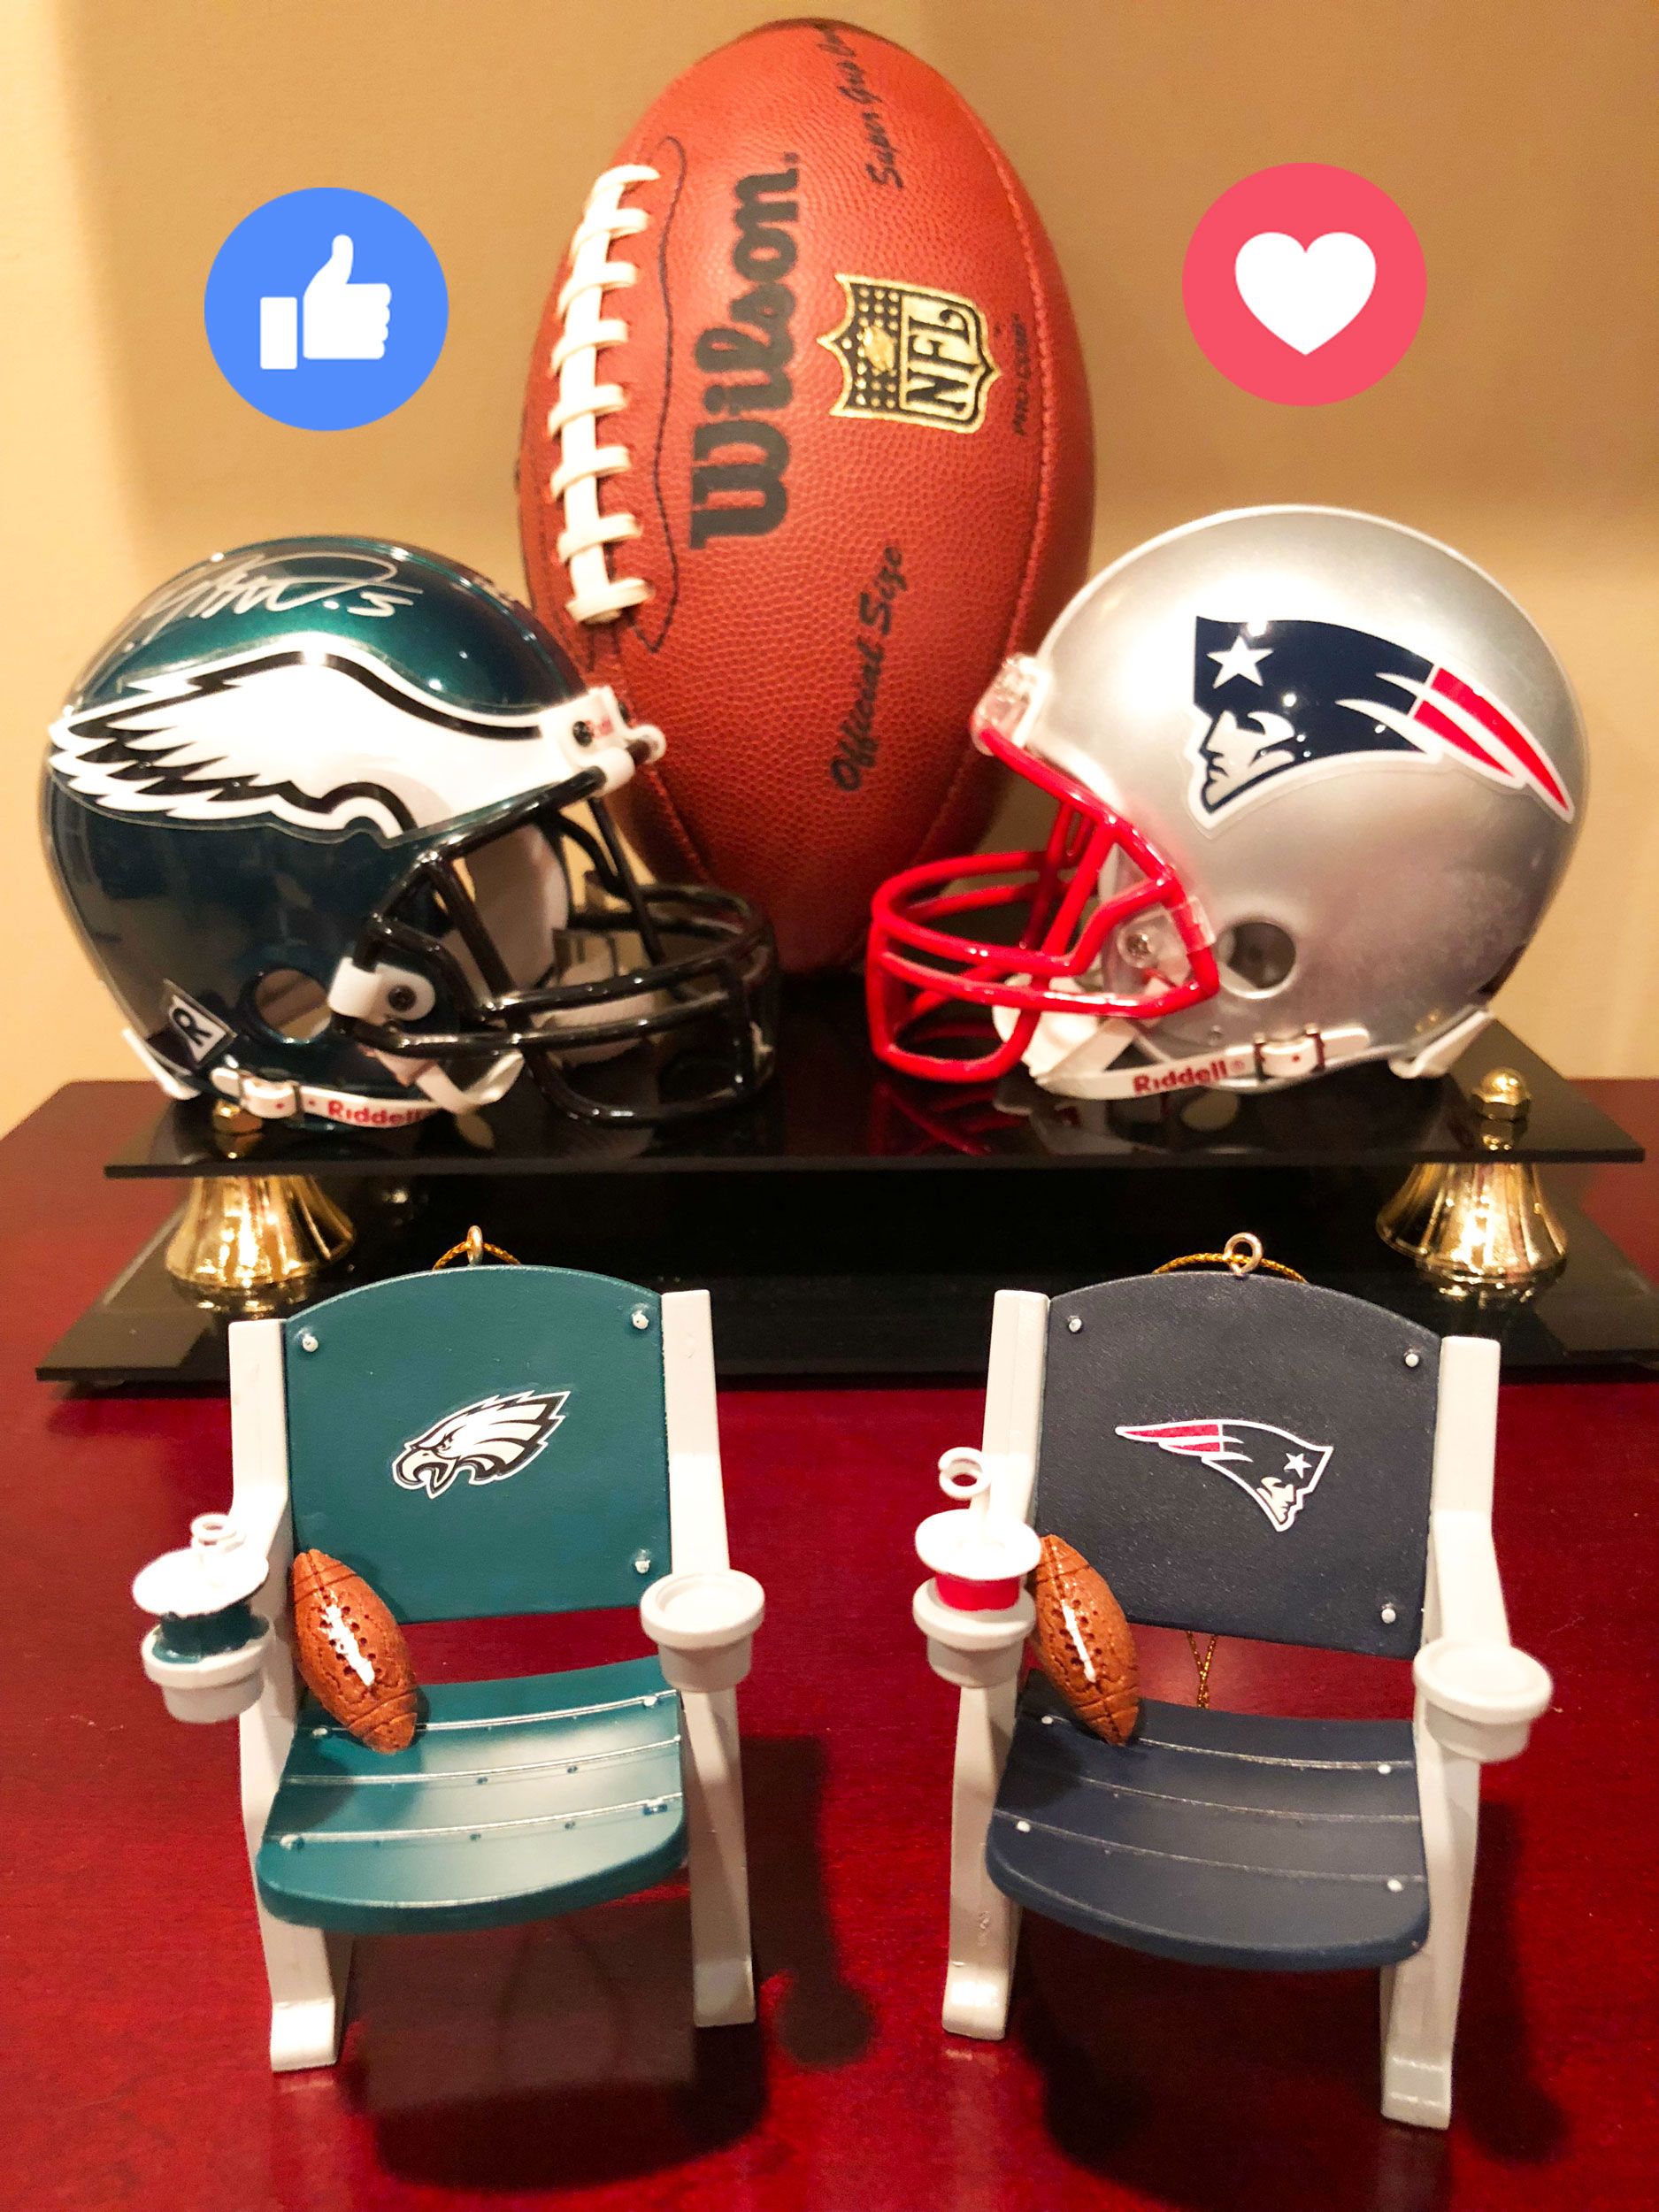 An Eagles helmet and Patriots helmet behind two ornaments for the Eagles and Patriots teams with stadium seats for each. | OrnamentShop.com